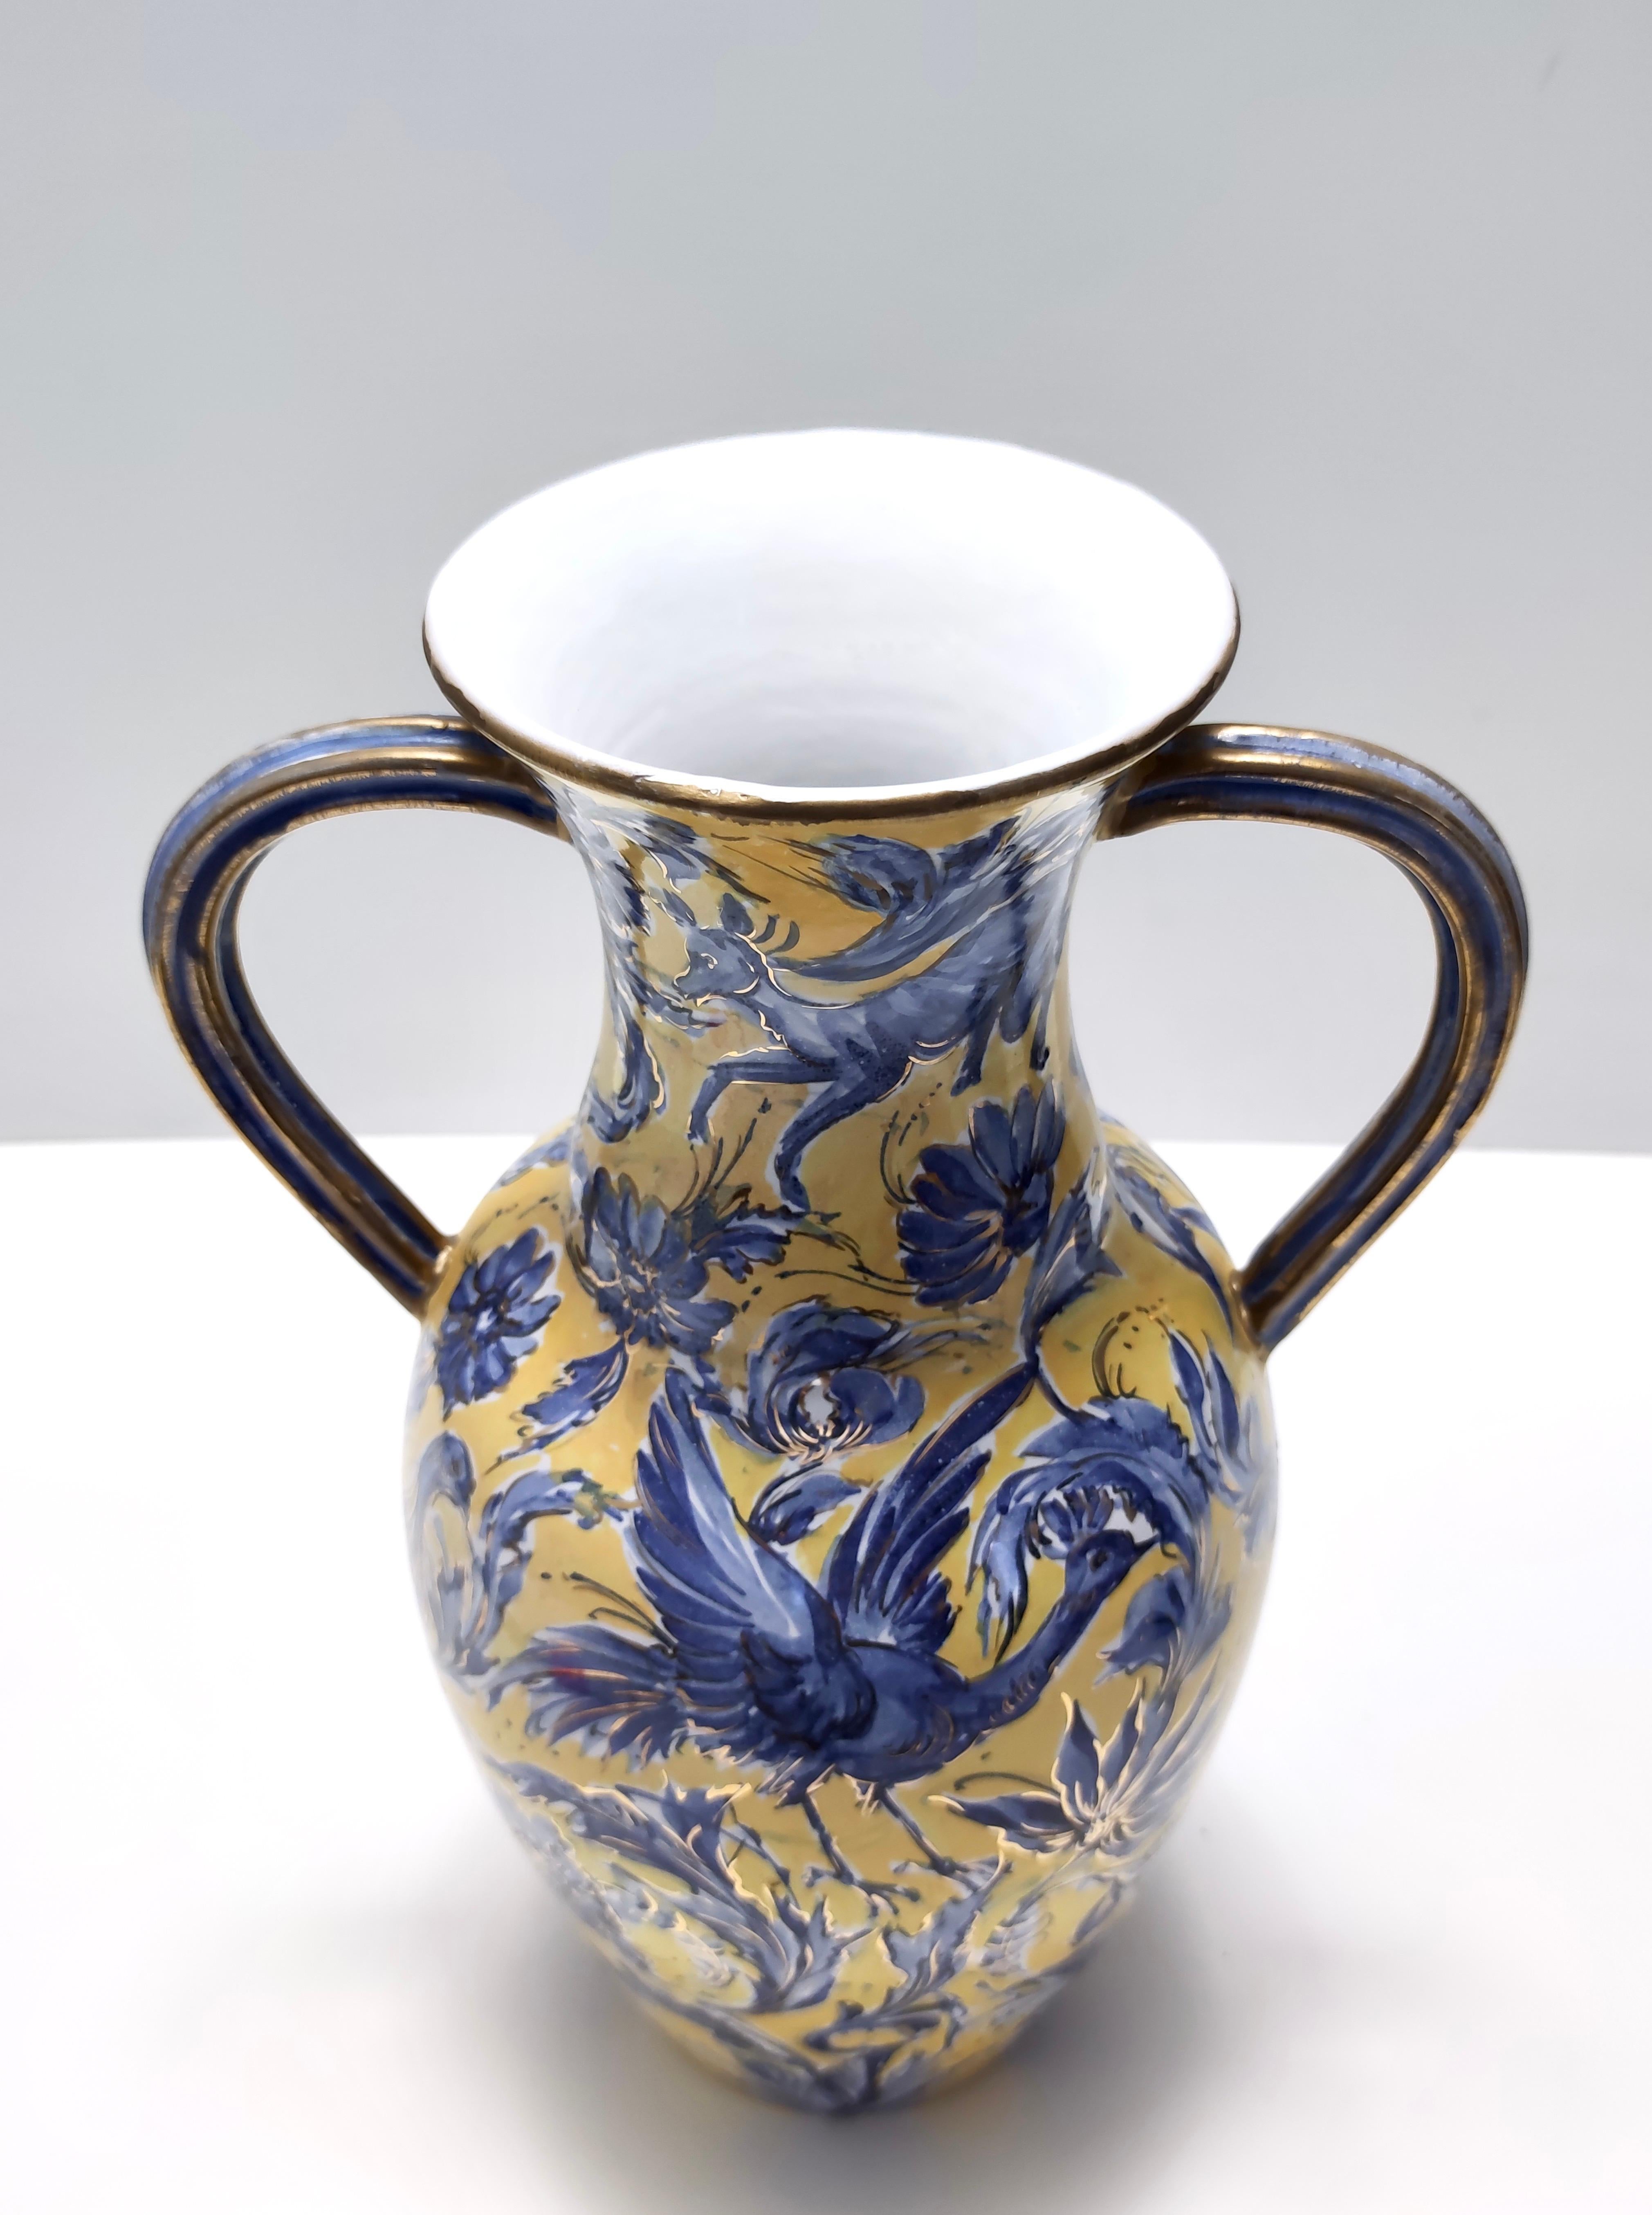 Vintage Handmade Yellow and Blue Glazed Ceramic Amphora by Zulimo Aretini, Italy In Good Condition For Sale In Bresso, Lombardy